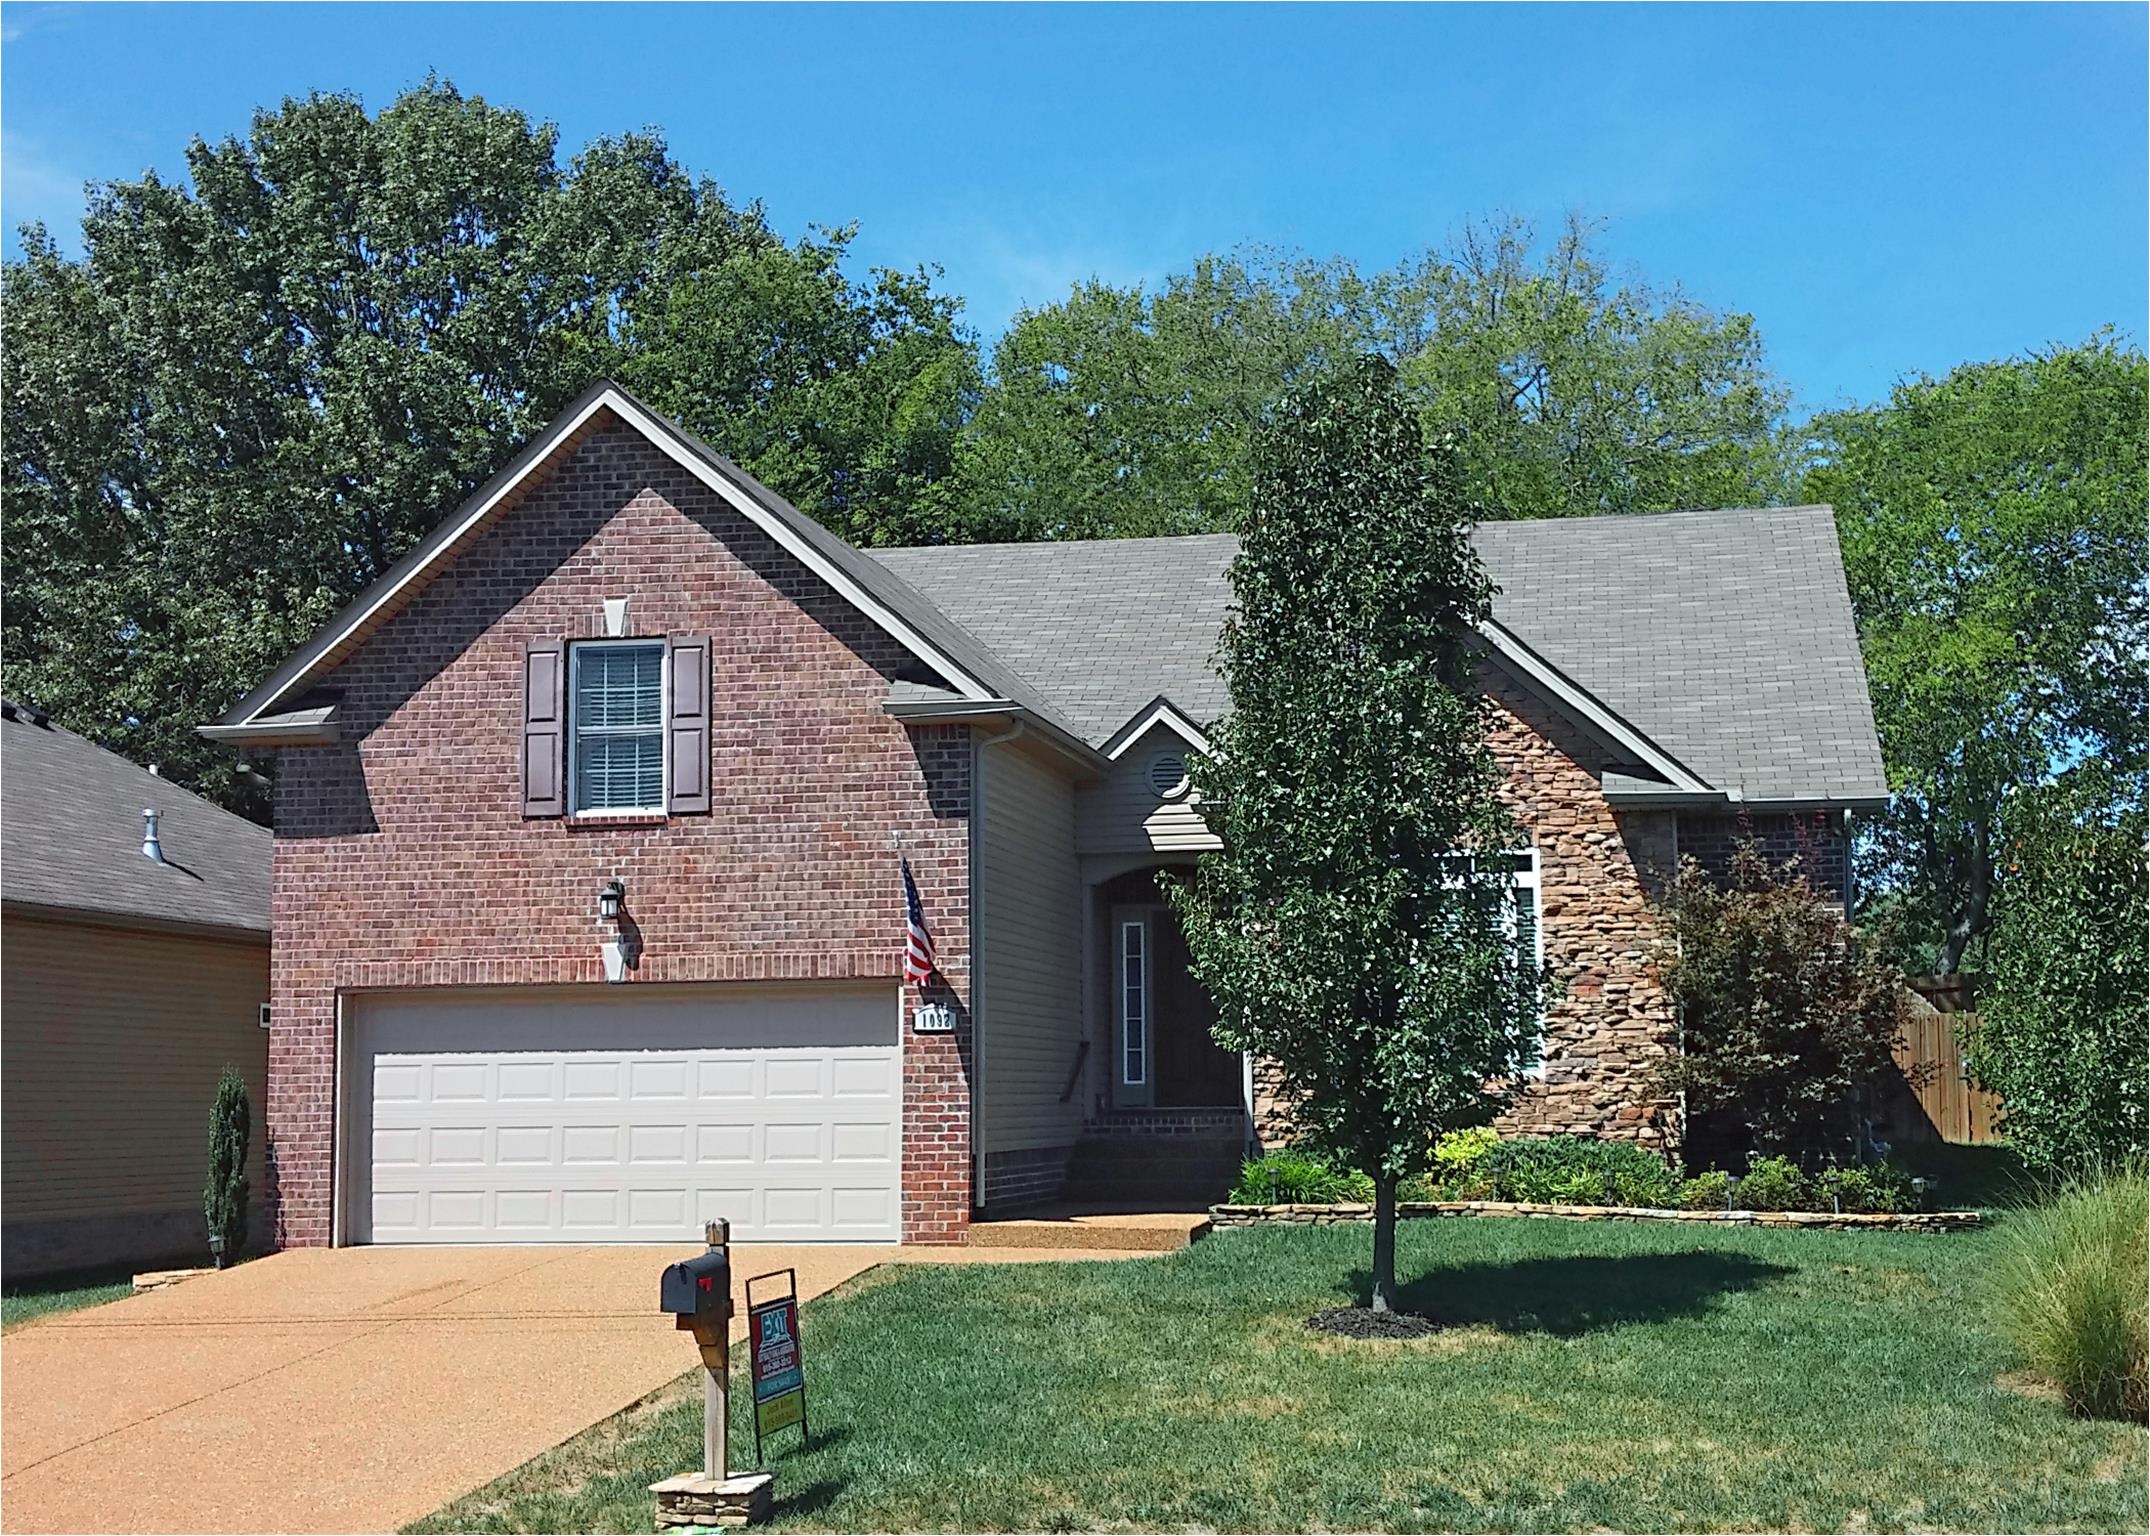 289900 1092 golf view way spring hill tn 37174 pending sale no showings